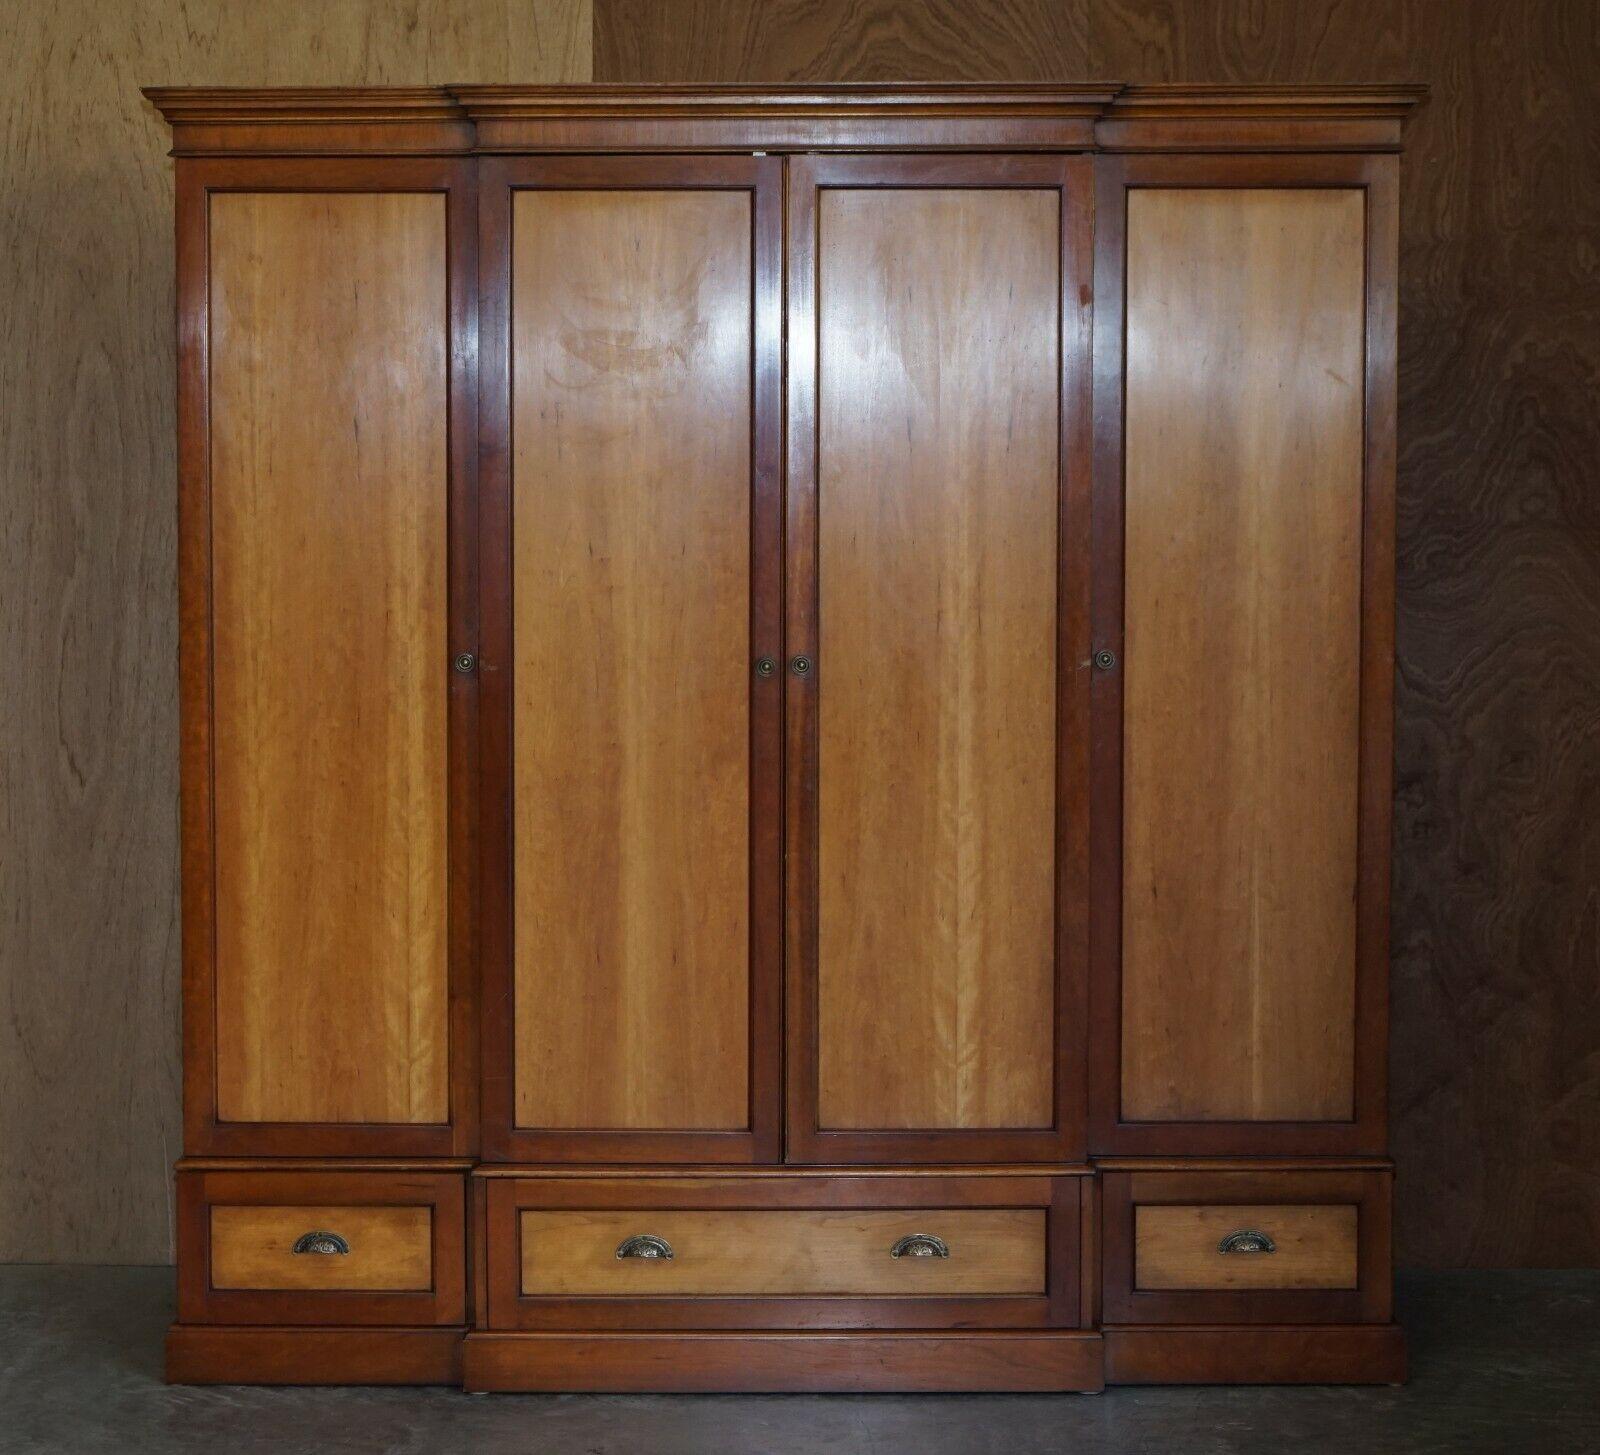 We are delighted to offer for sale this lovely large Cherrywood and Walnut breakfront wardrobe with drawers to the base.

A very large and well made piece offering huge amounts of storage, you have one large central hanging wardrobe which has one